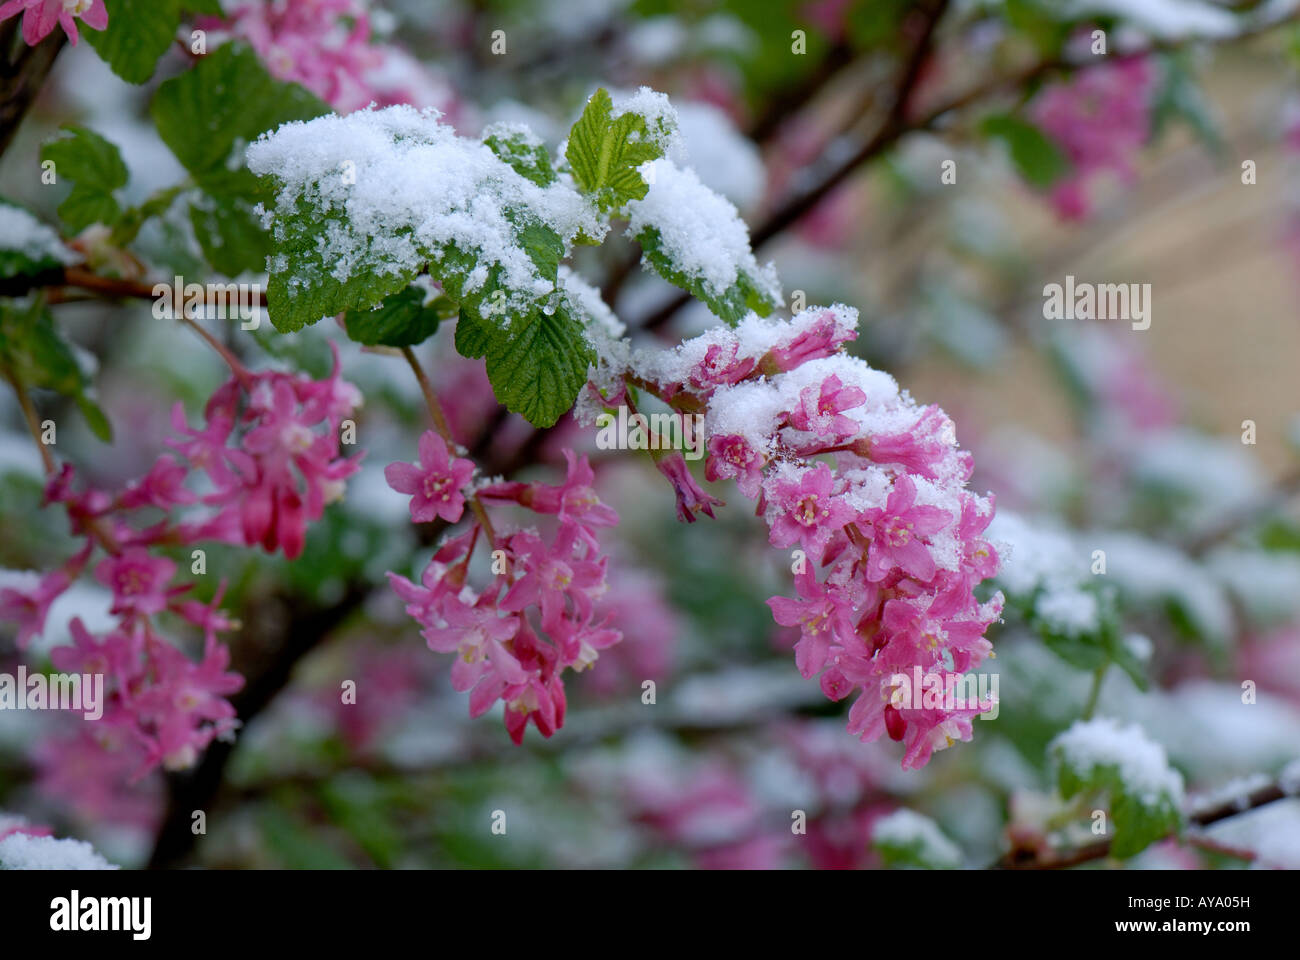 Flowering currant Ribes sanguineum flowers covered by a light snow fall in early spring Stock Photo